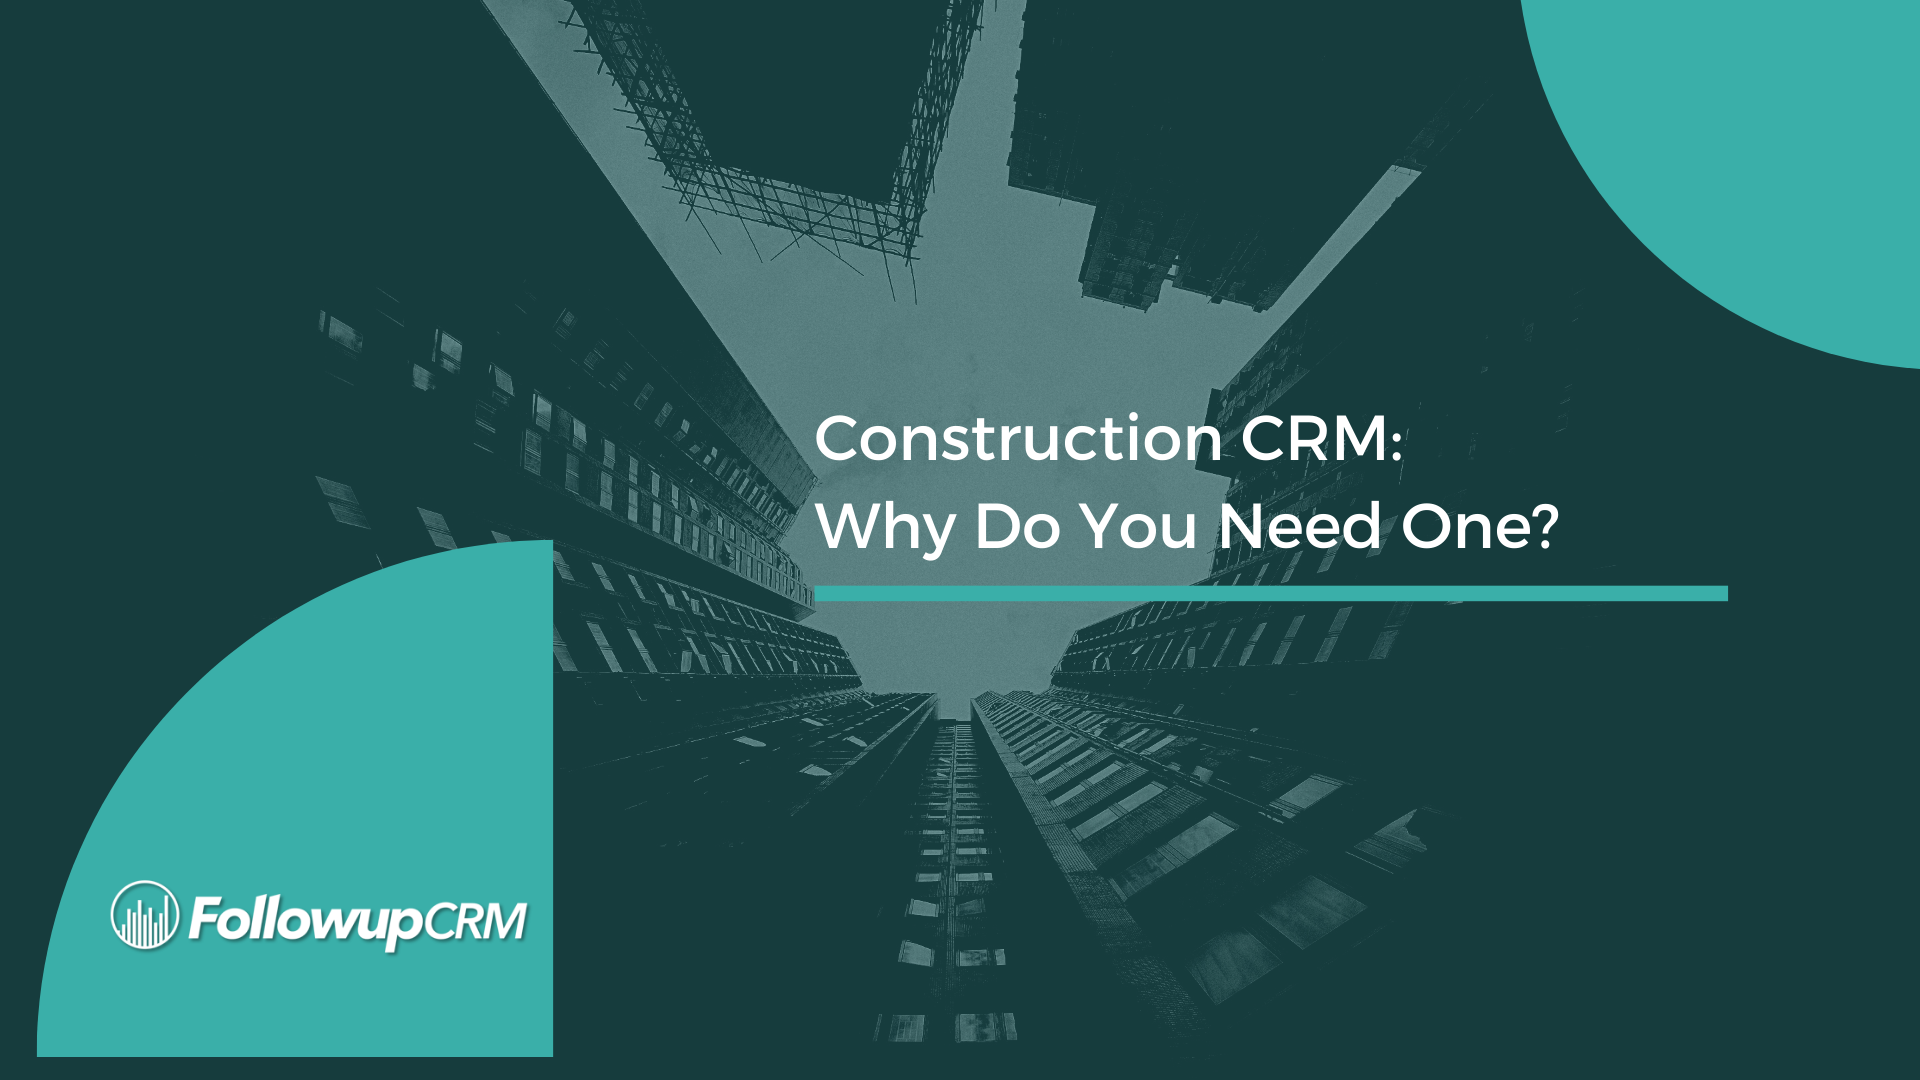 Construction CRM: Why Do You Need One?